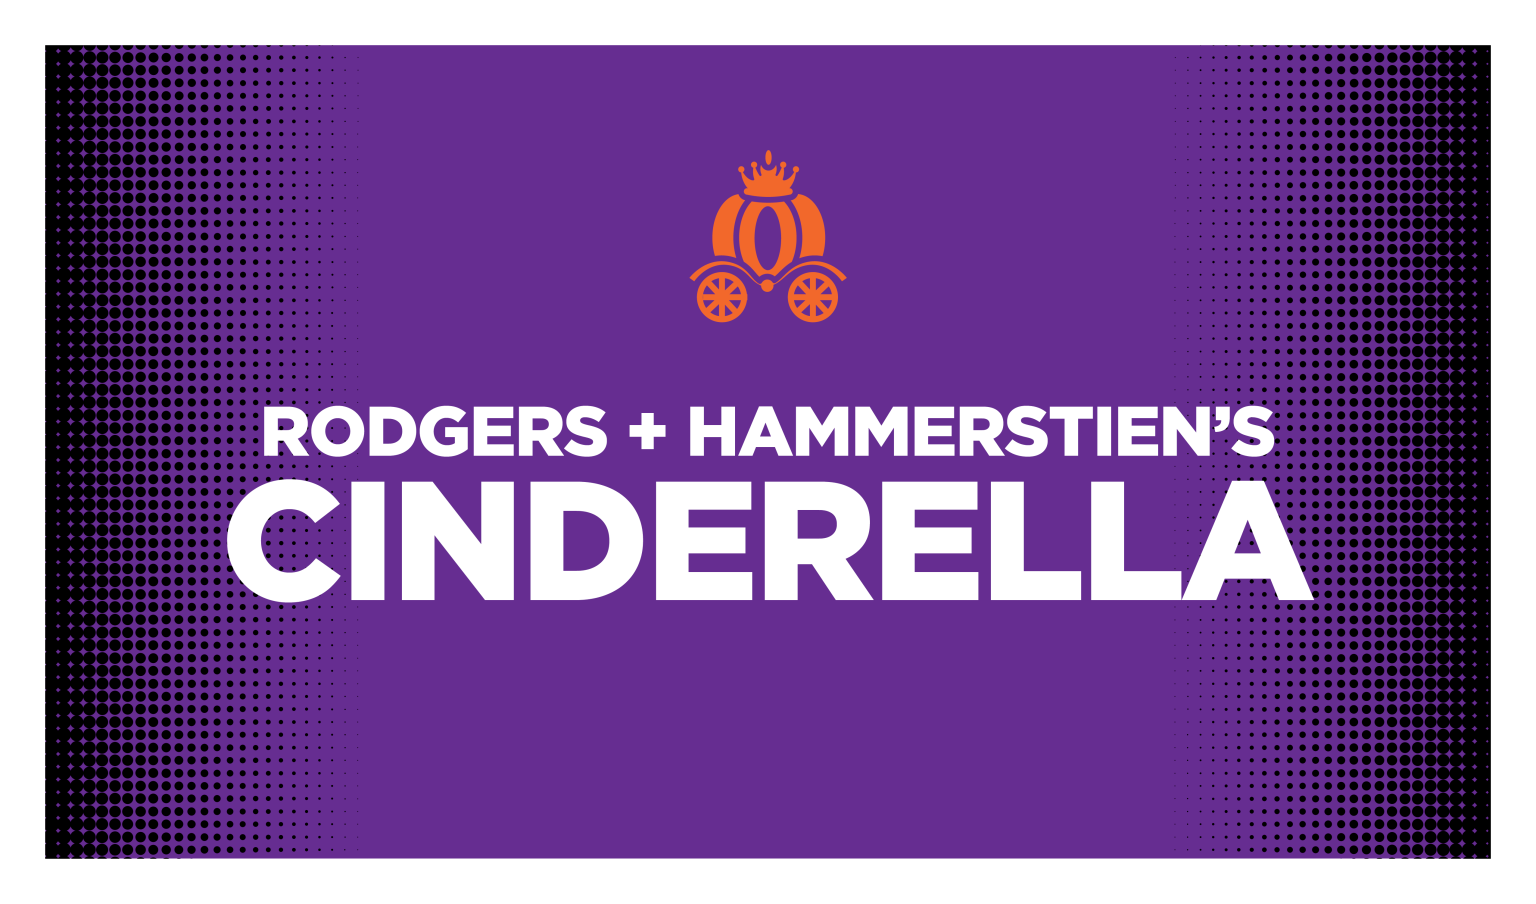 Purple background with a small orange pumpkin shaped carriage. White text that says Rodgers + Hammerstein's Cinderella